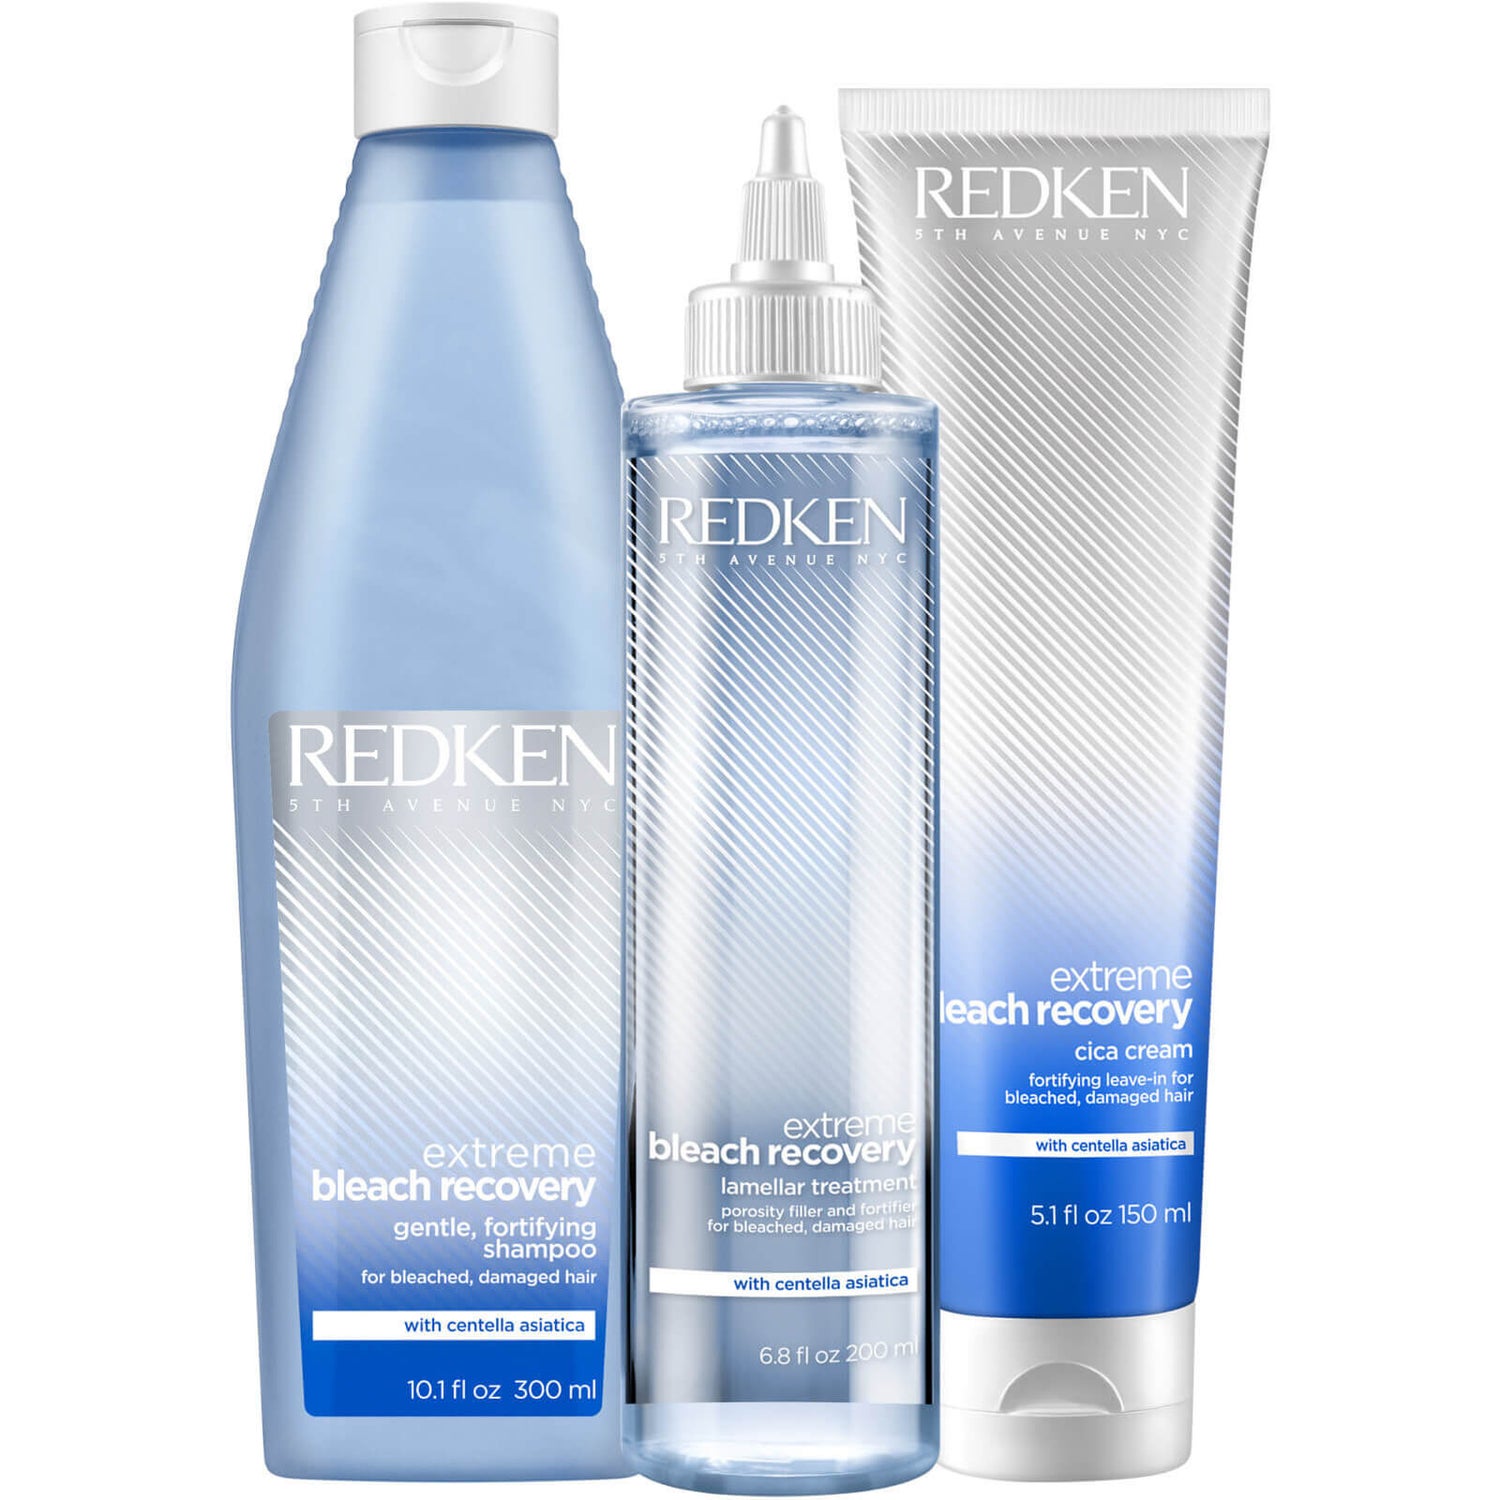 Redken Extreme Bleach Recovery Set